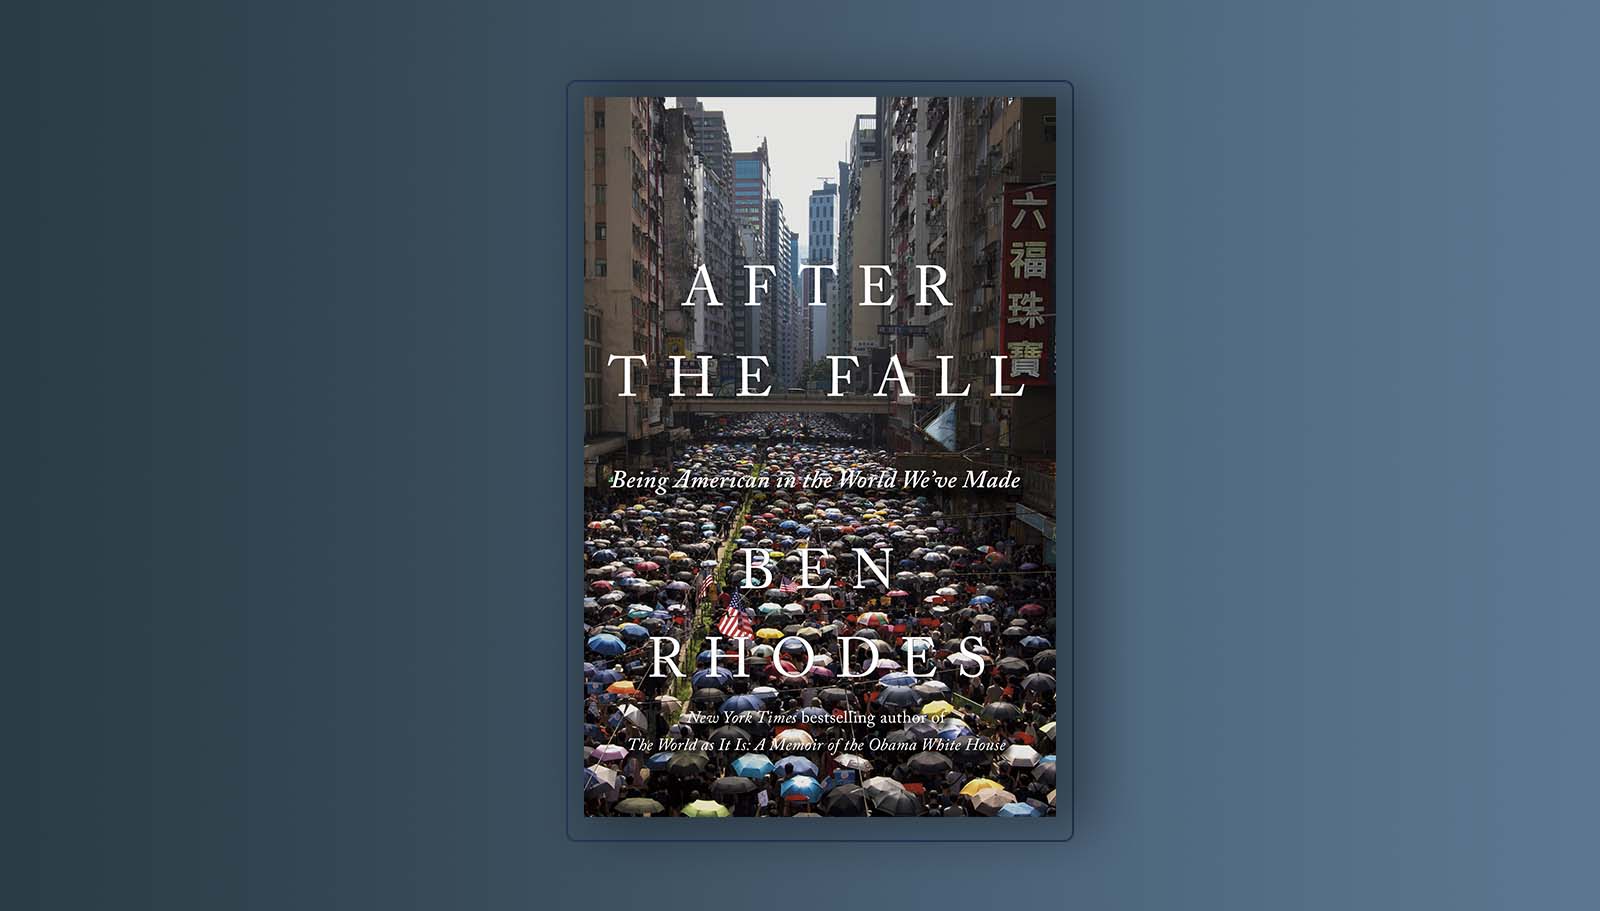 “After the Fall: Being American in the World We’ve Made” by Ben RhodesPenguin Random House, 2021, 358pp, $28.00 